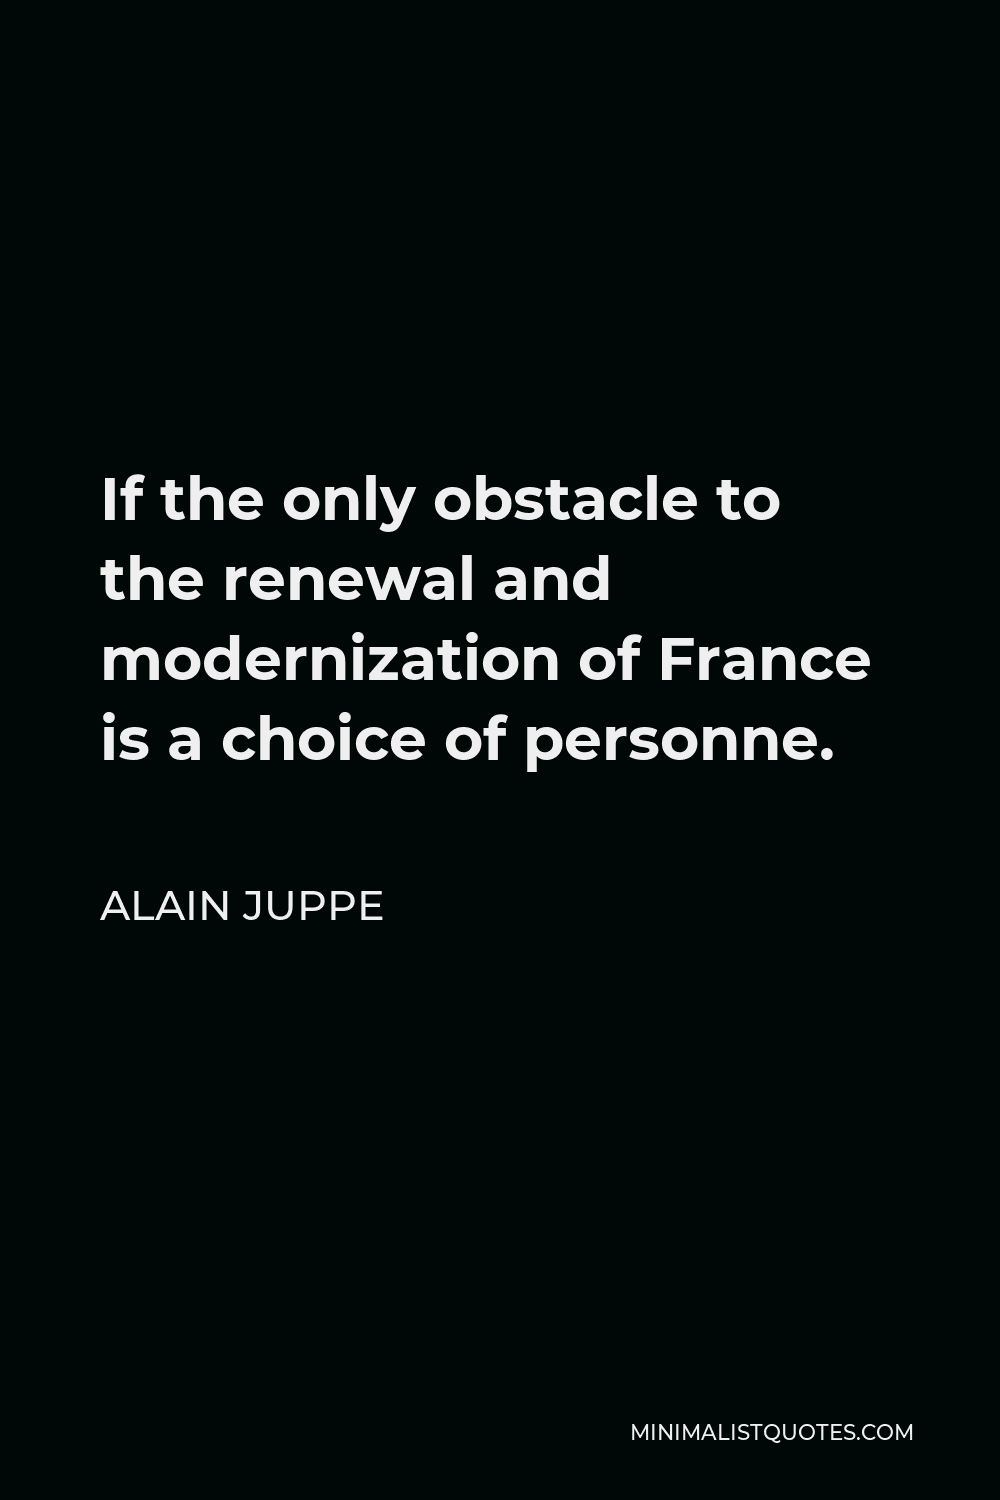 Alain Juppe Quote - If the only obstacle to the renewal and modernization of France is a choice of personne.